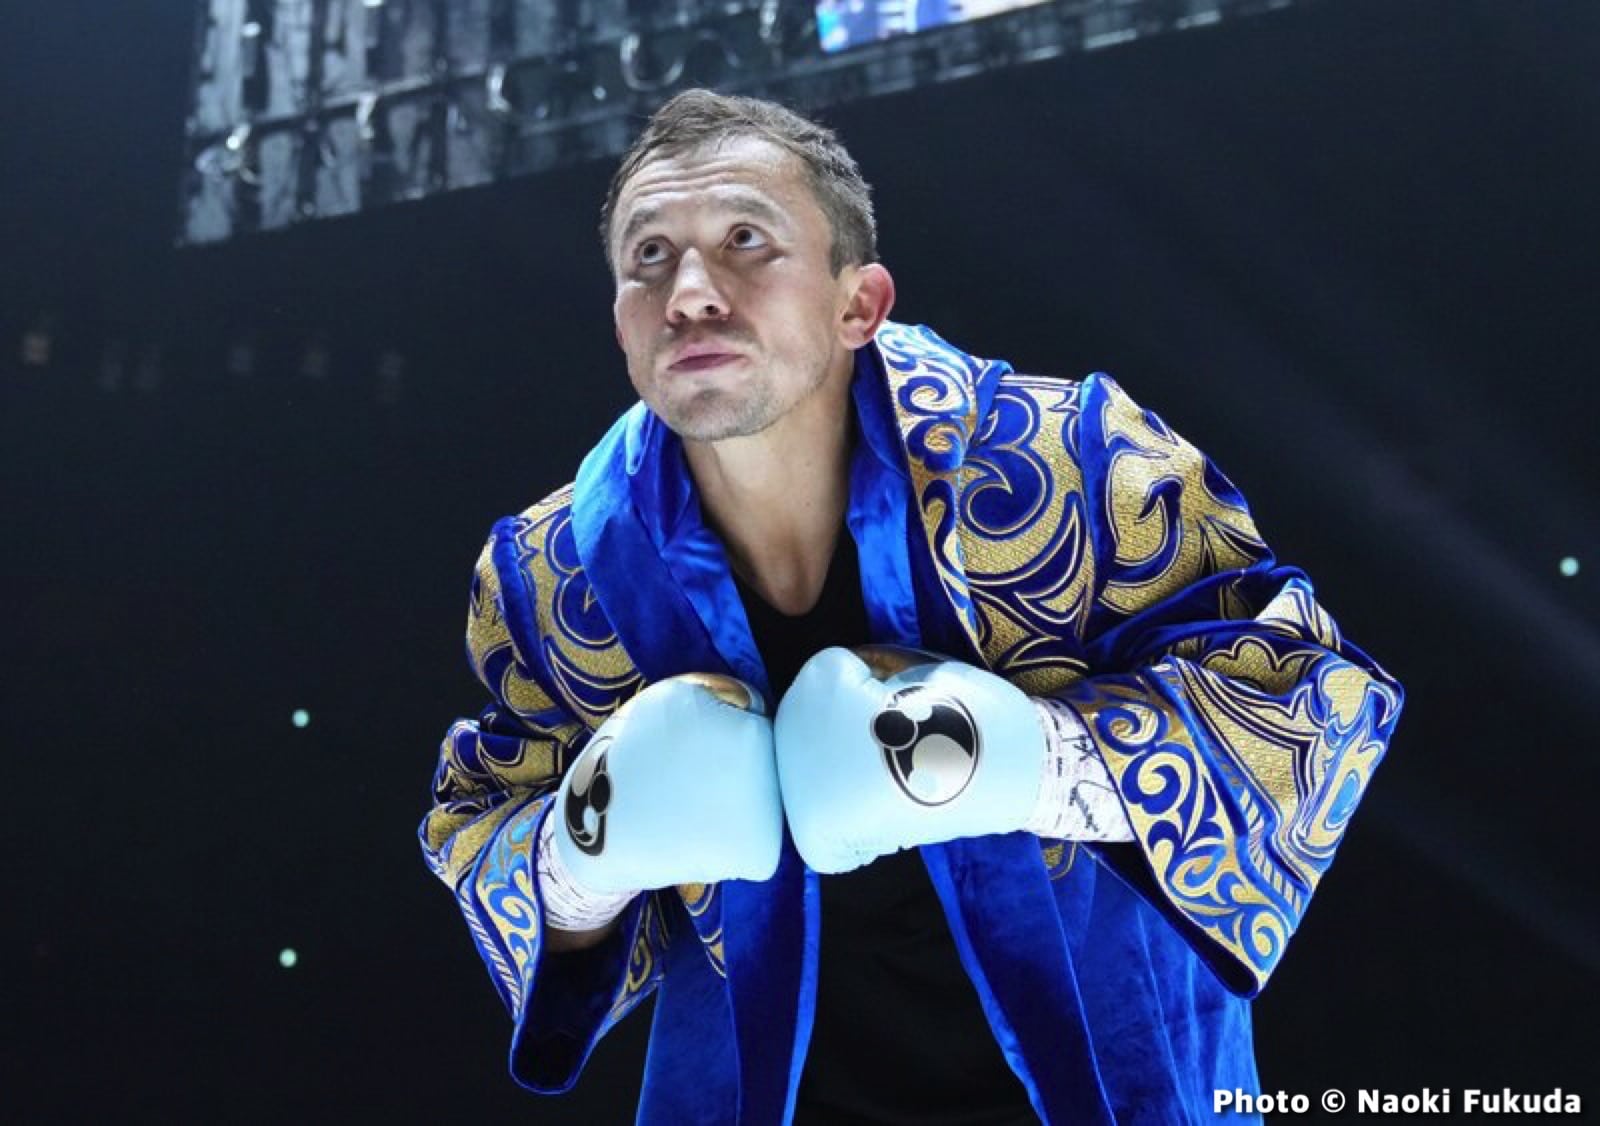 Image: Golovkin could get "Brutally beaten" by Canelo says Tony Bellew